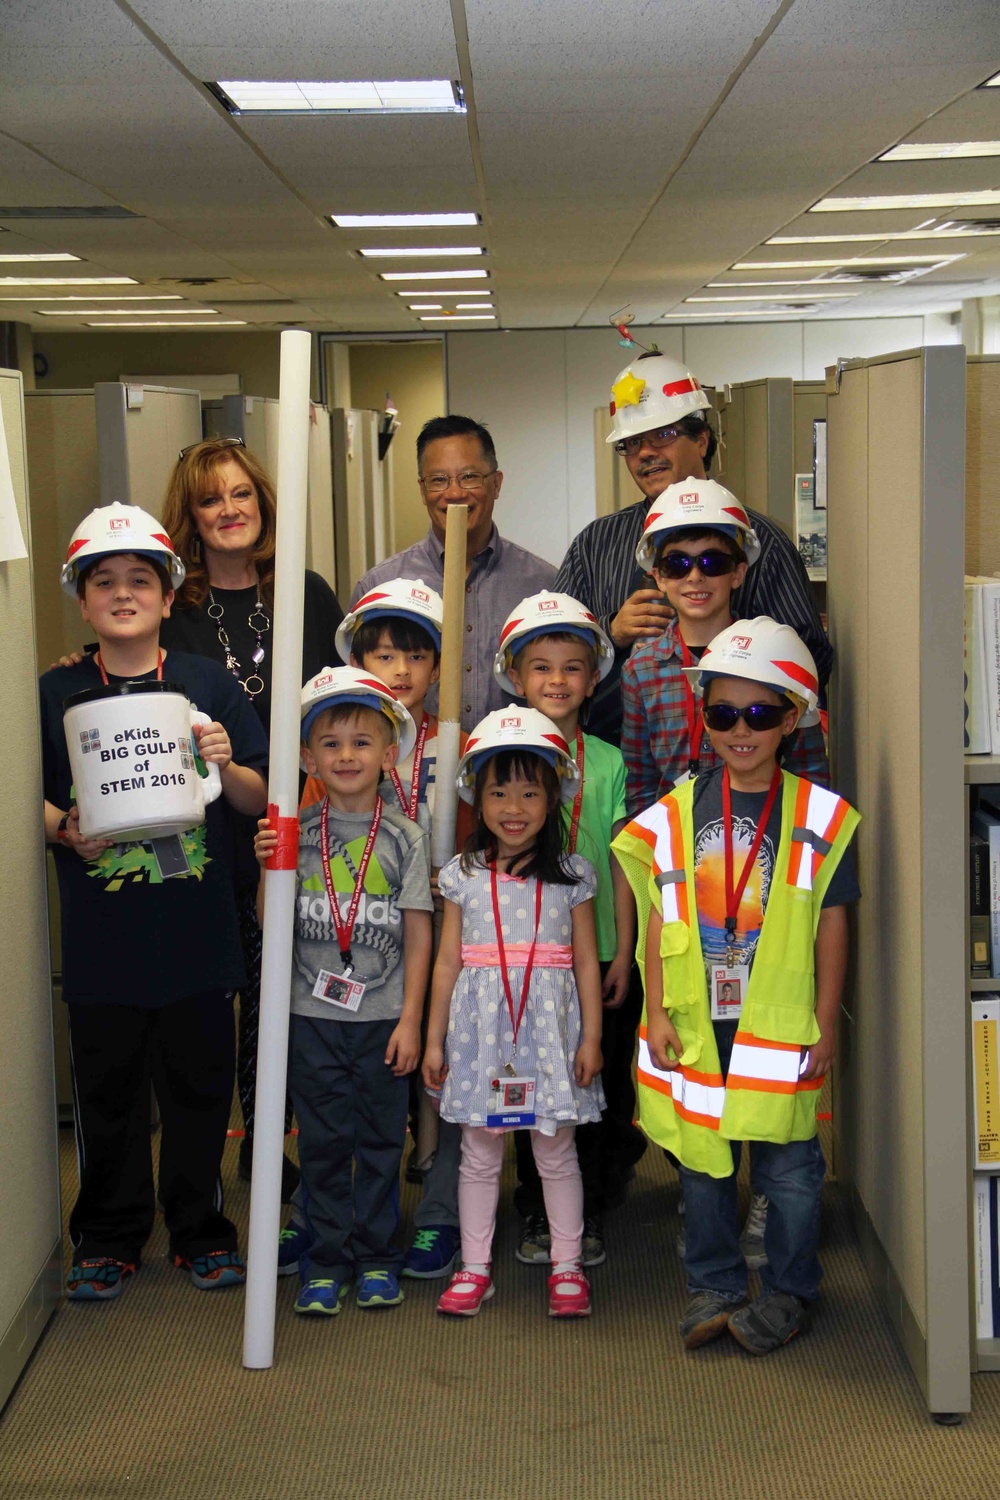 Division employees' kids visit, learn